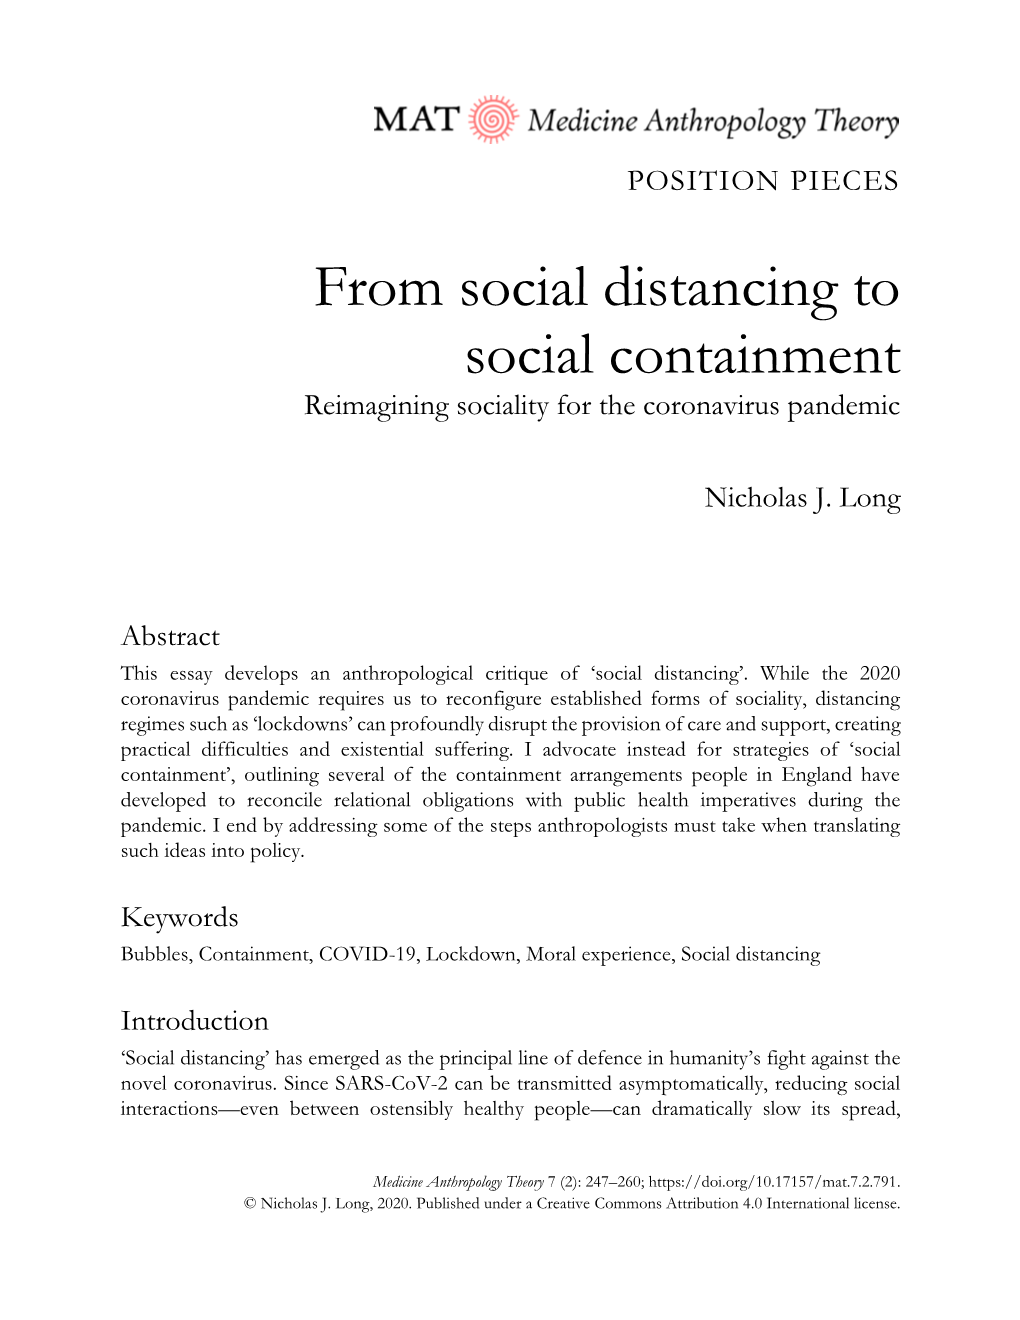 From Social Distancing to Social Containment Reimagining Sociality for the Coronavirus Pandemic